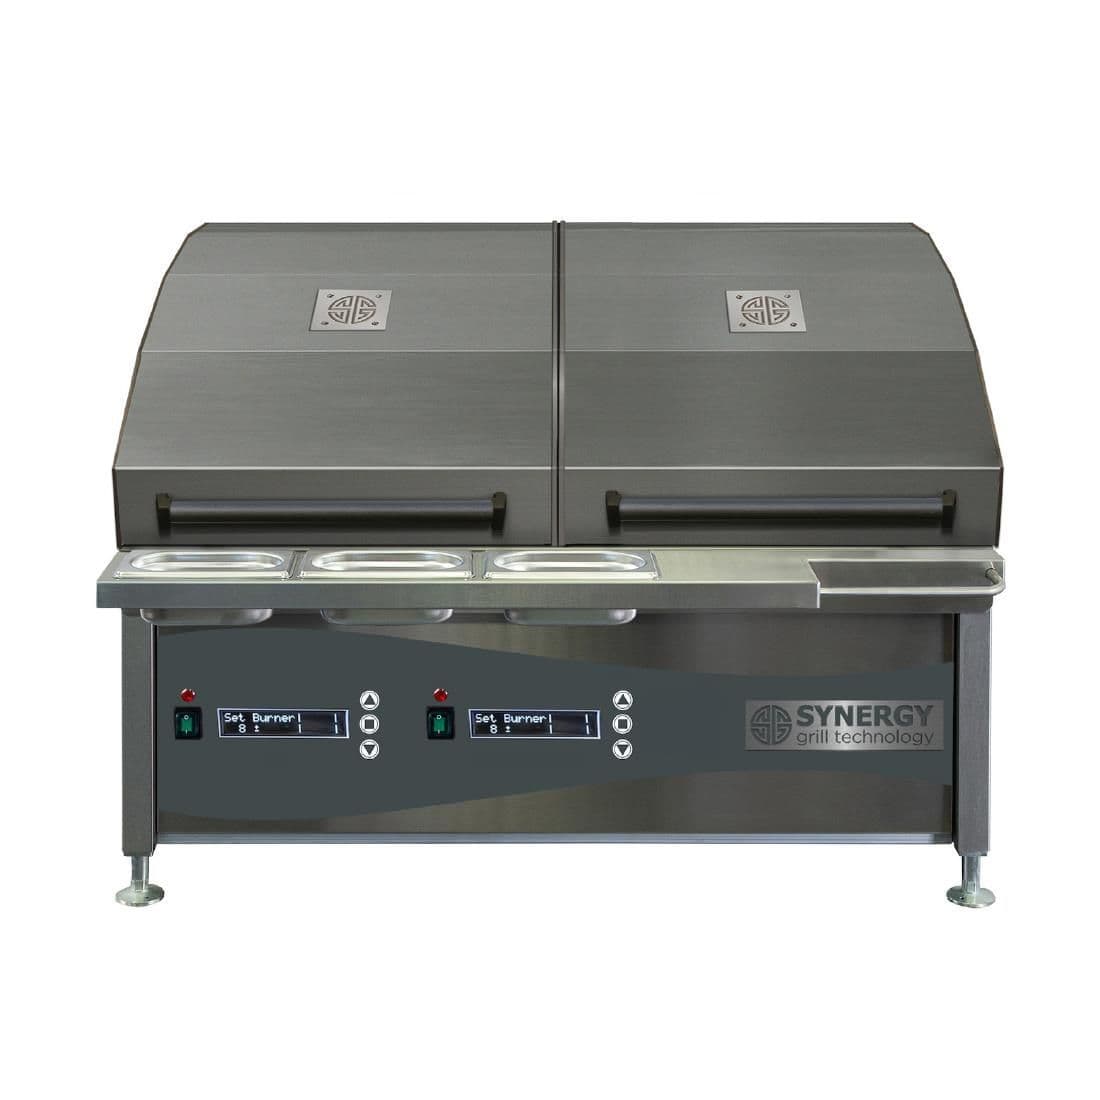 CX885 Synergy Grill Gas Chargrill Oven with Twin Lids CGO900 JD Catering Equipment Solutions Ltd